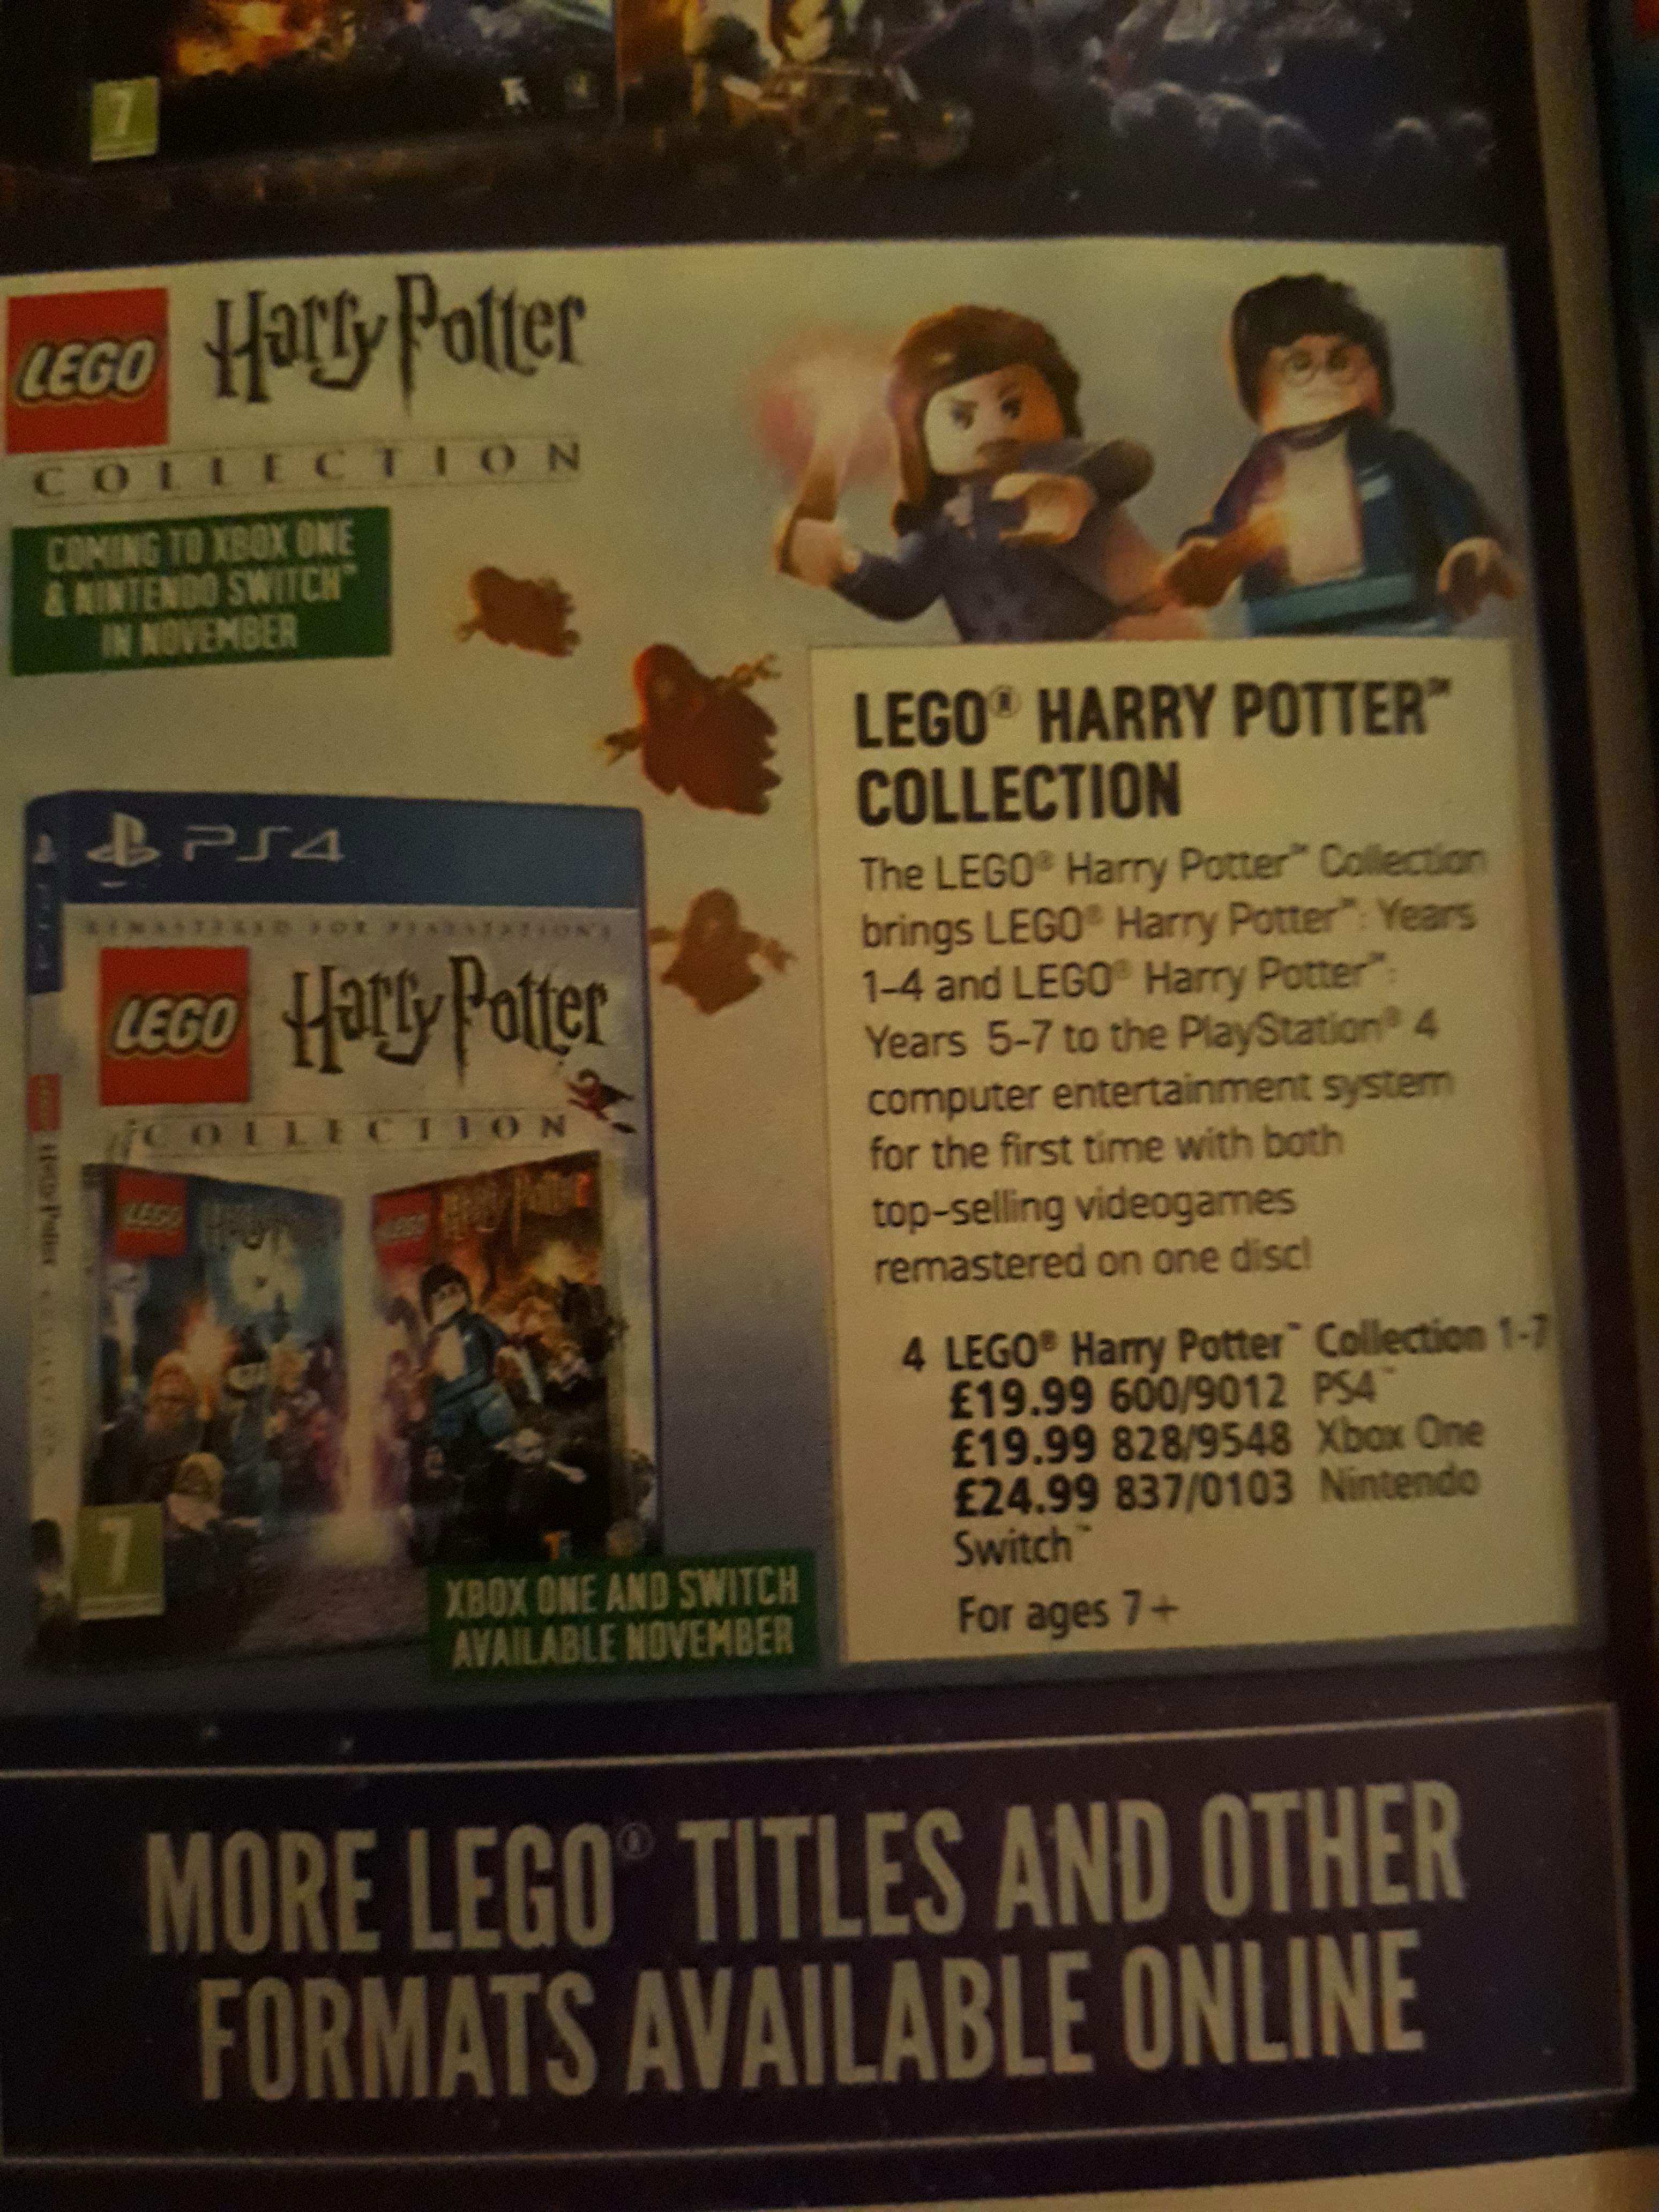 lego harry potter collection switch